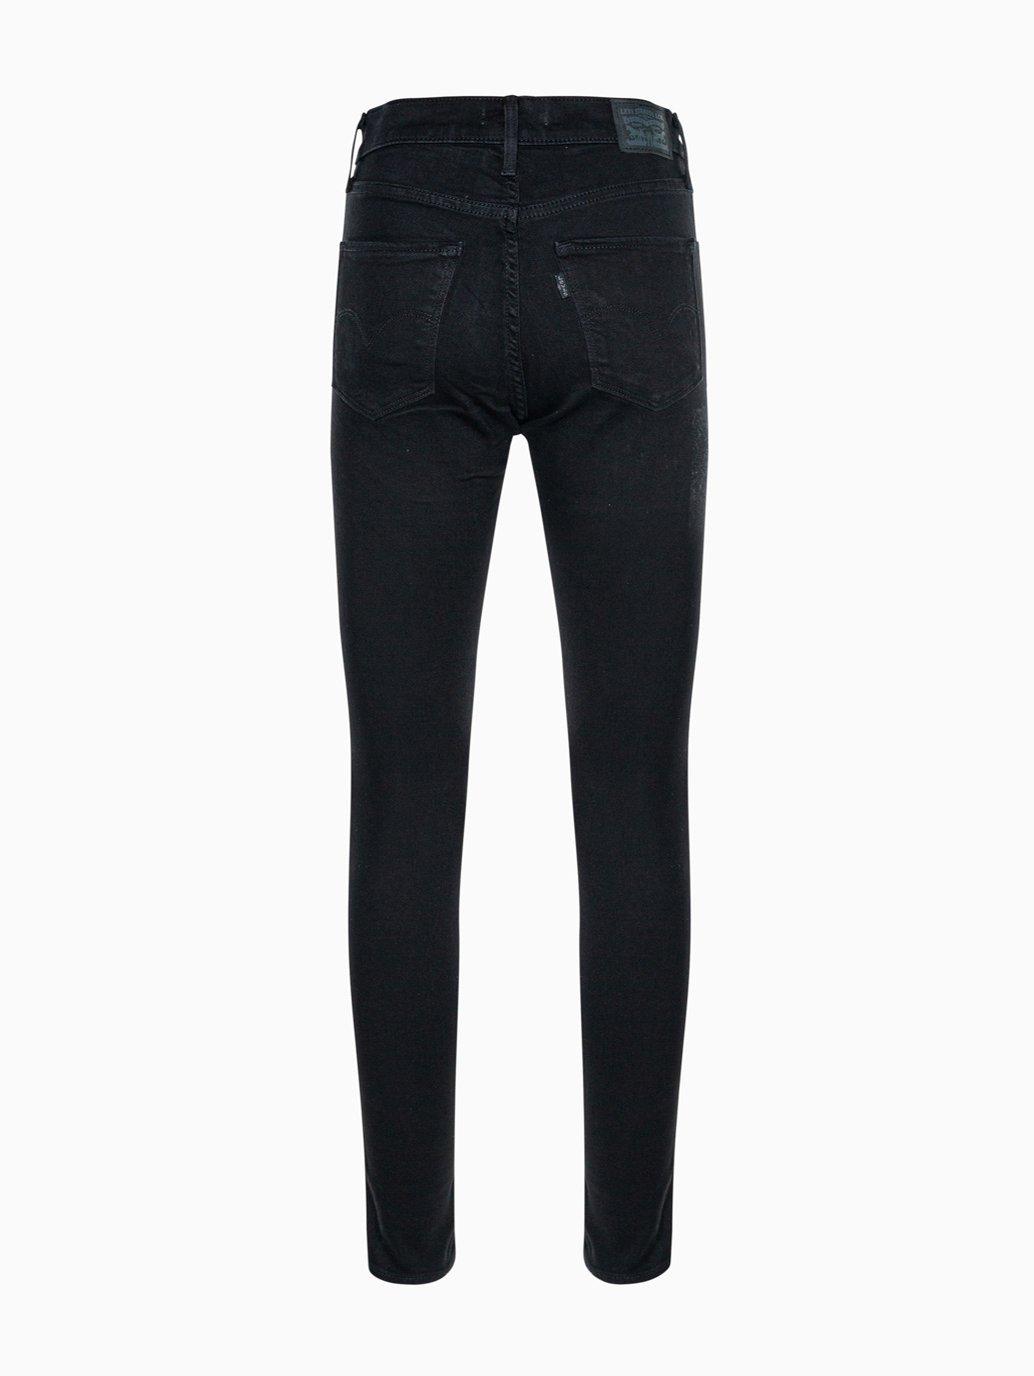 levis malaysia womens 310 shaping super skinny jeans 560410064 14 Details